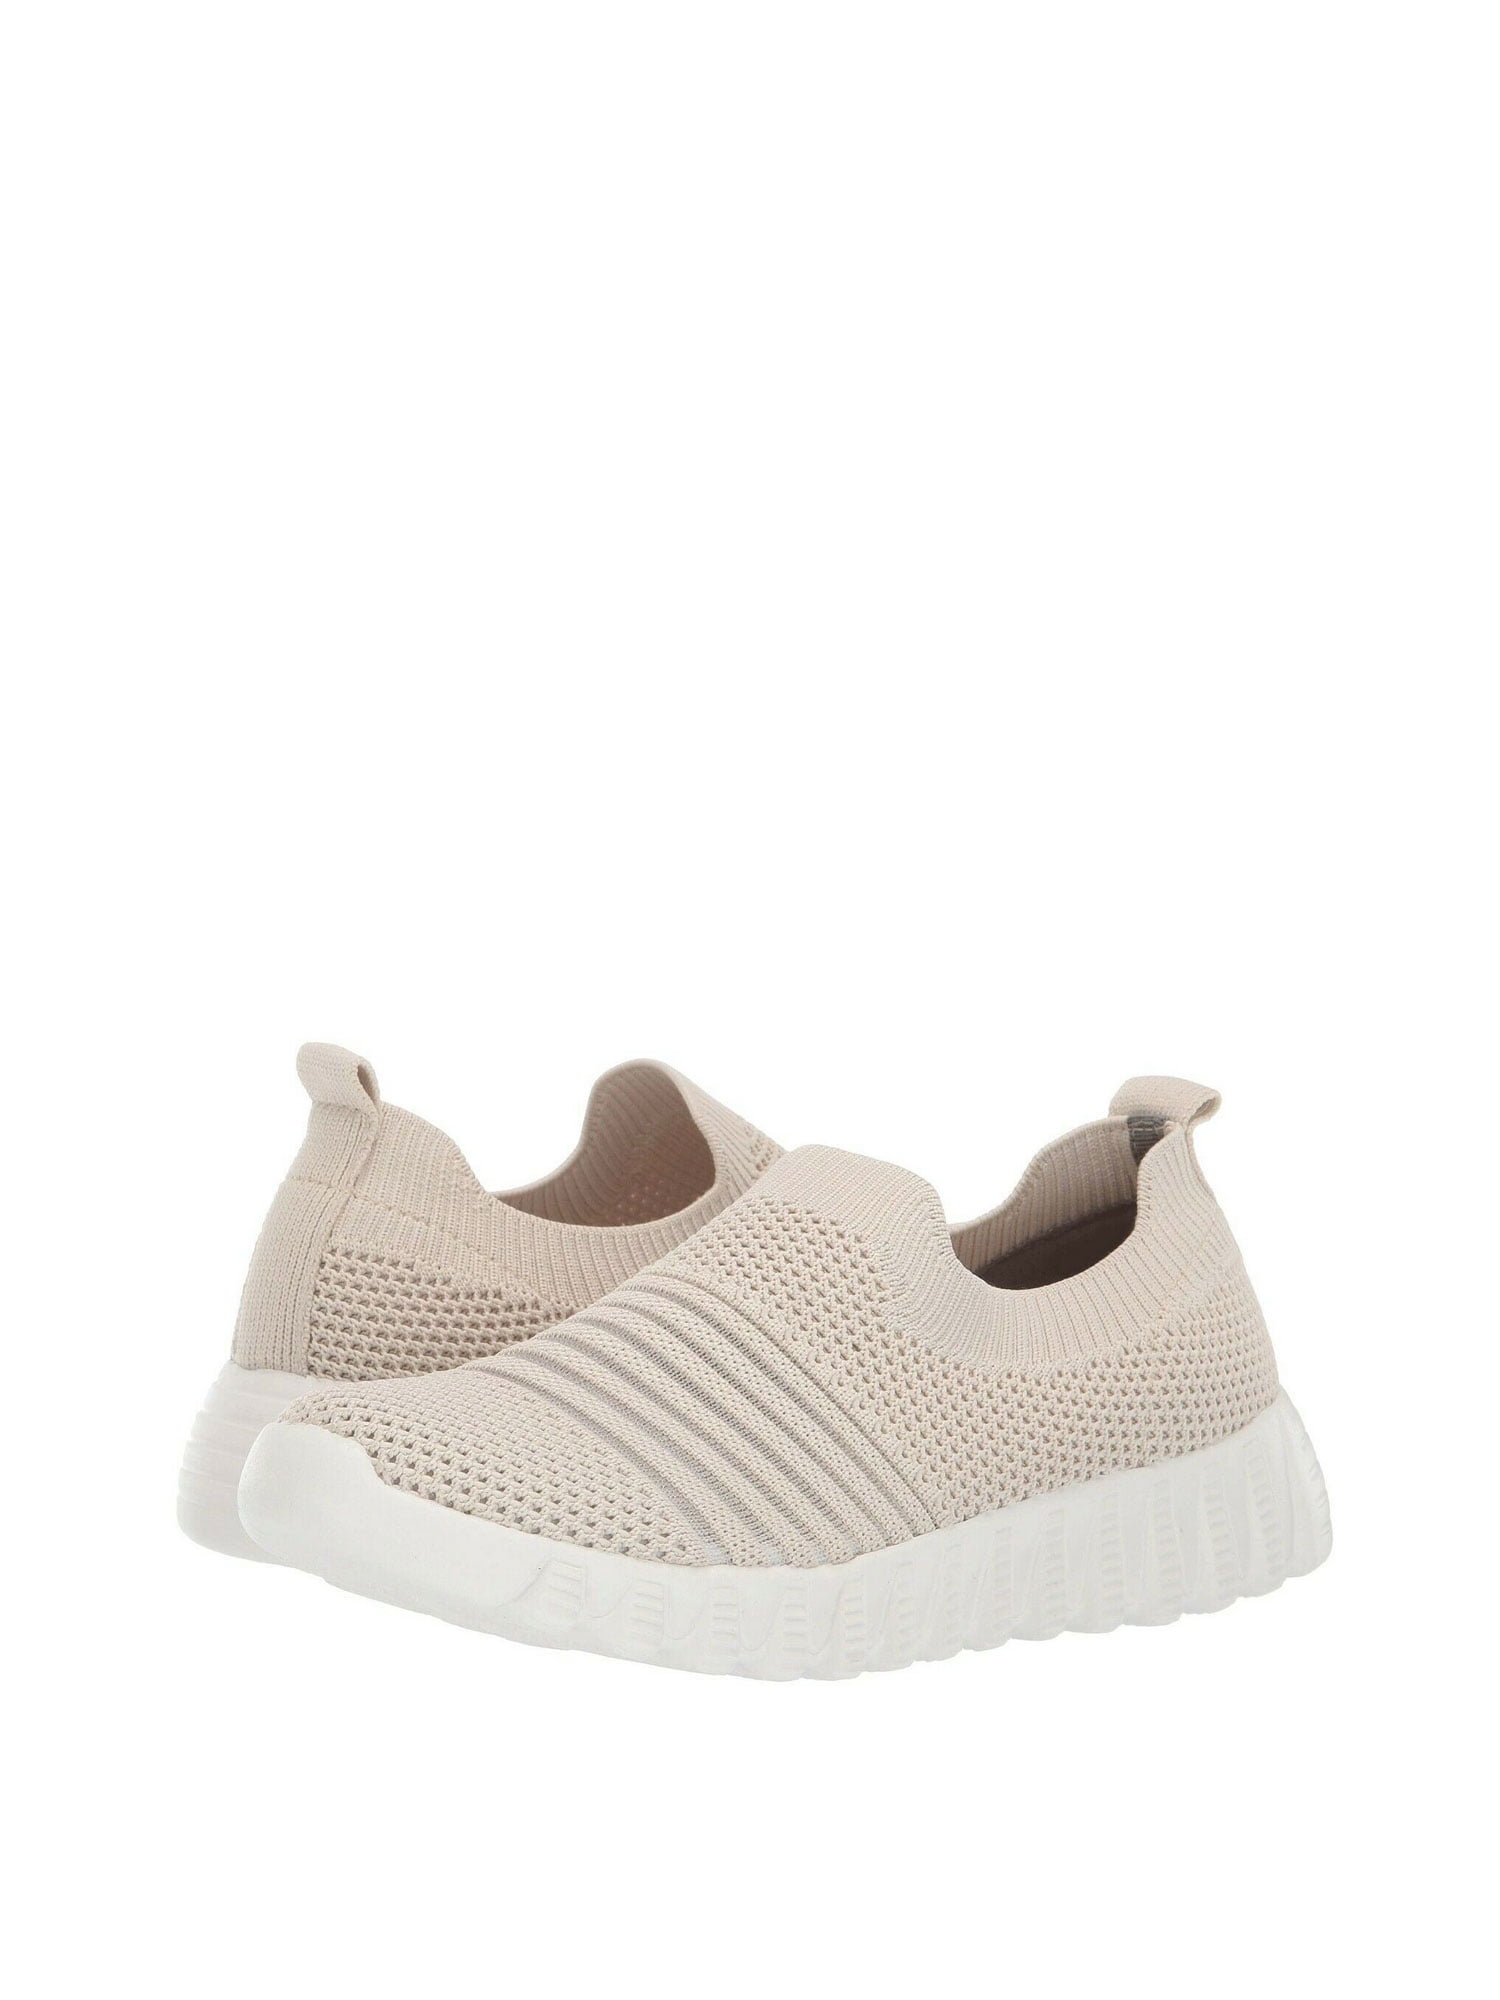 stretch knit slip on sneakers